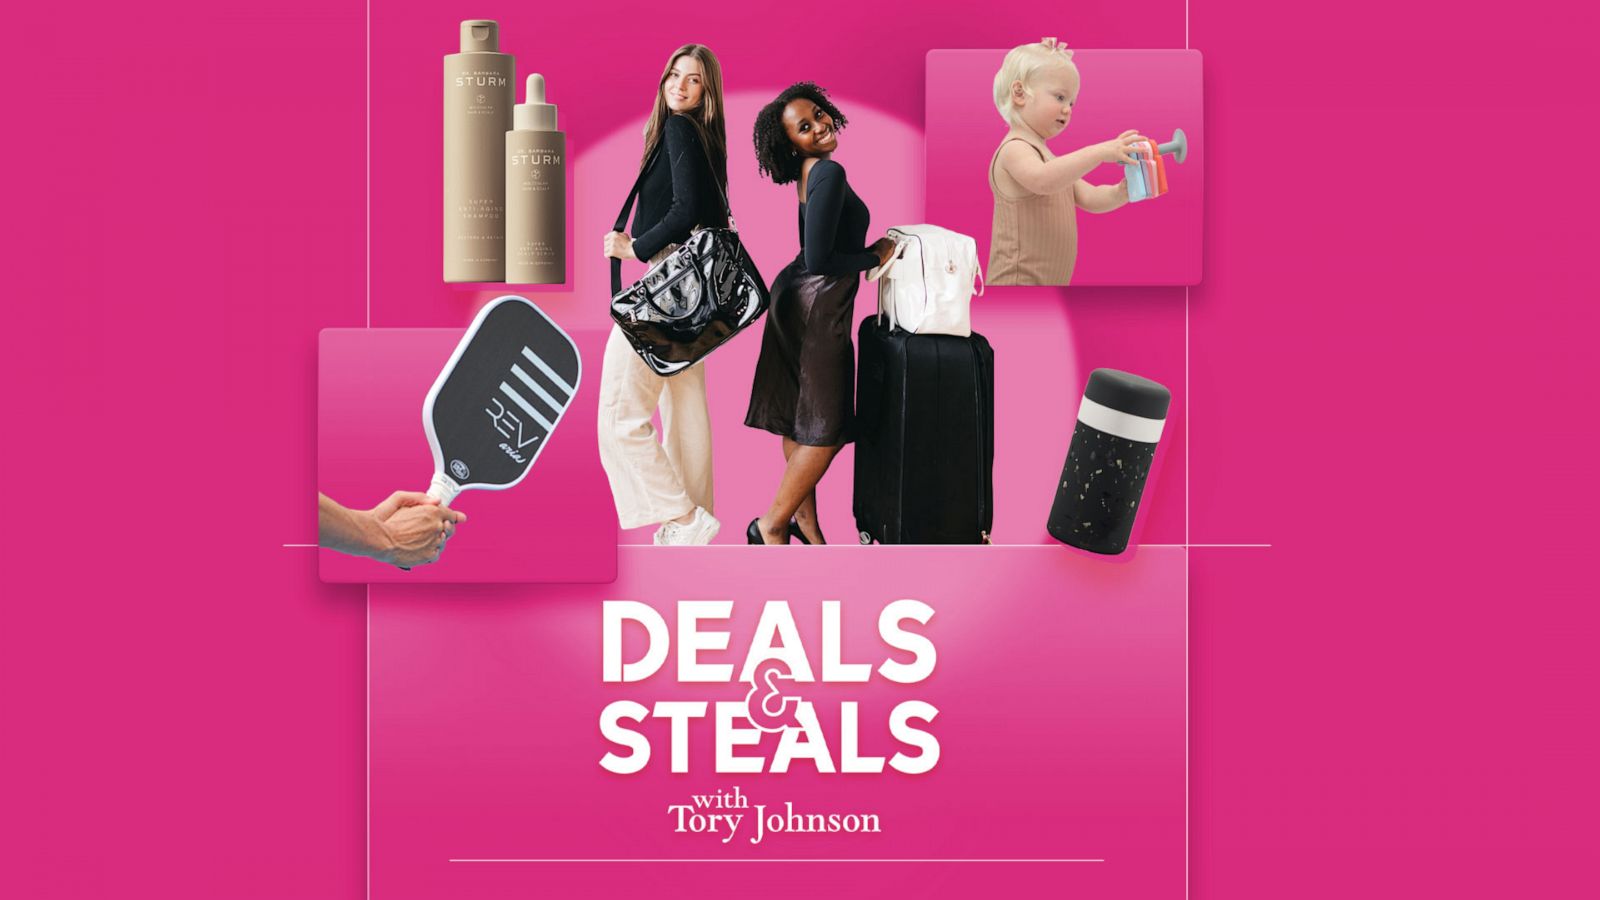 Bella Bags for Women - Up to 75% off